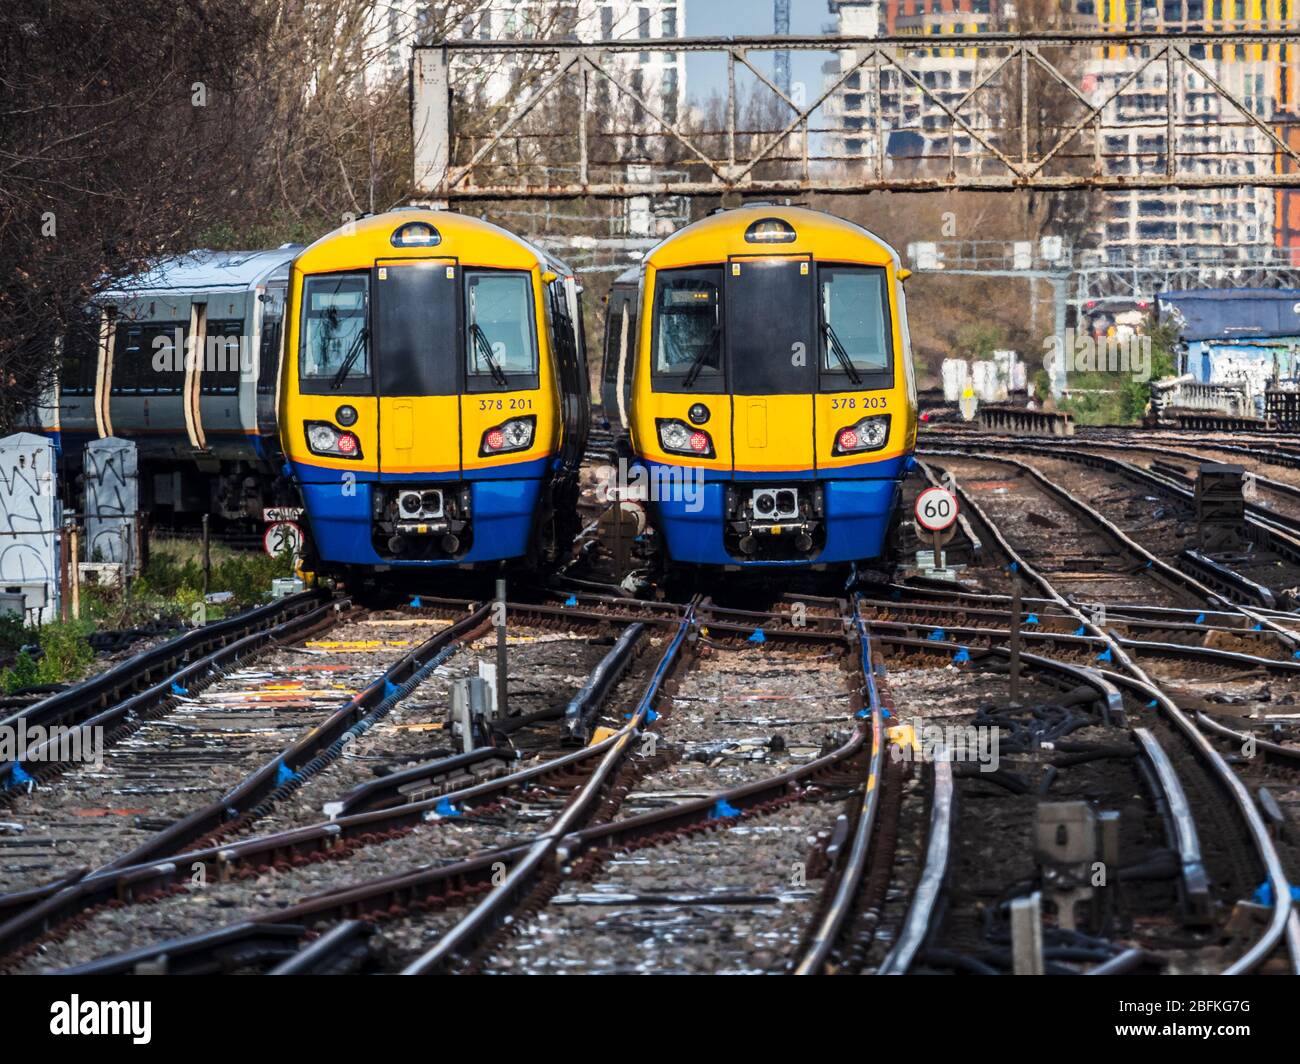 London Overground Capitalstar trains outside Clapham Junction Station in South London. British Rail Class 378 Capitalstar. Stock Photo